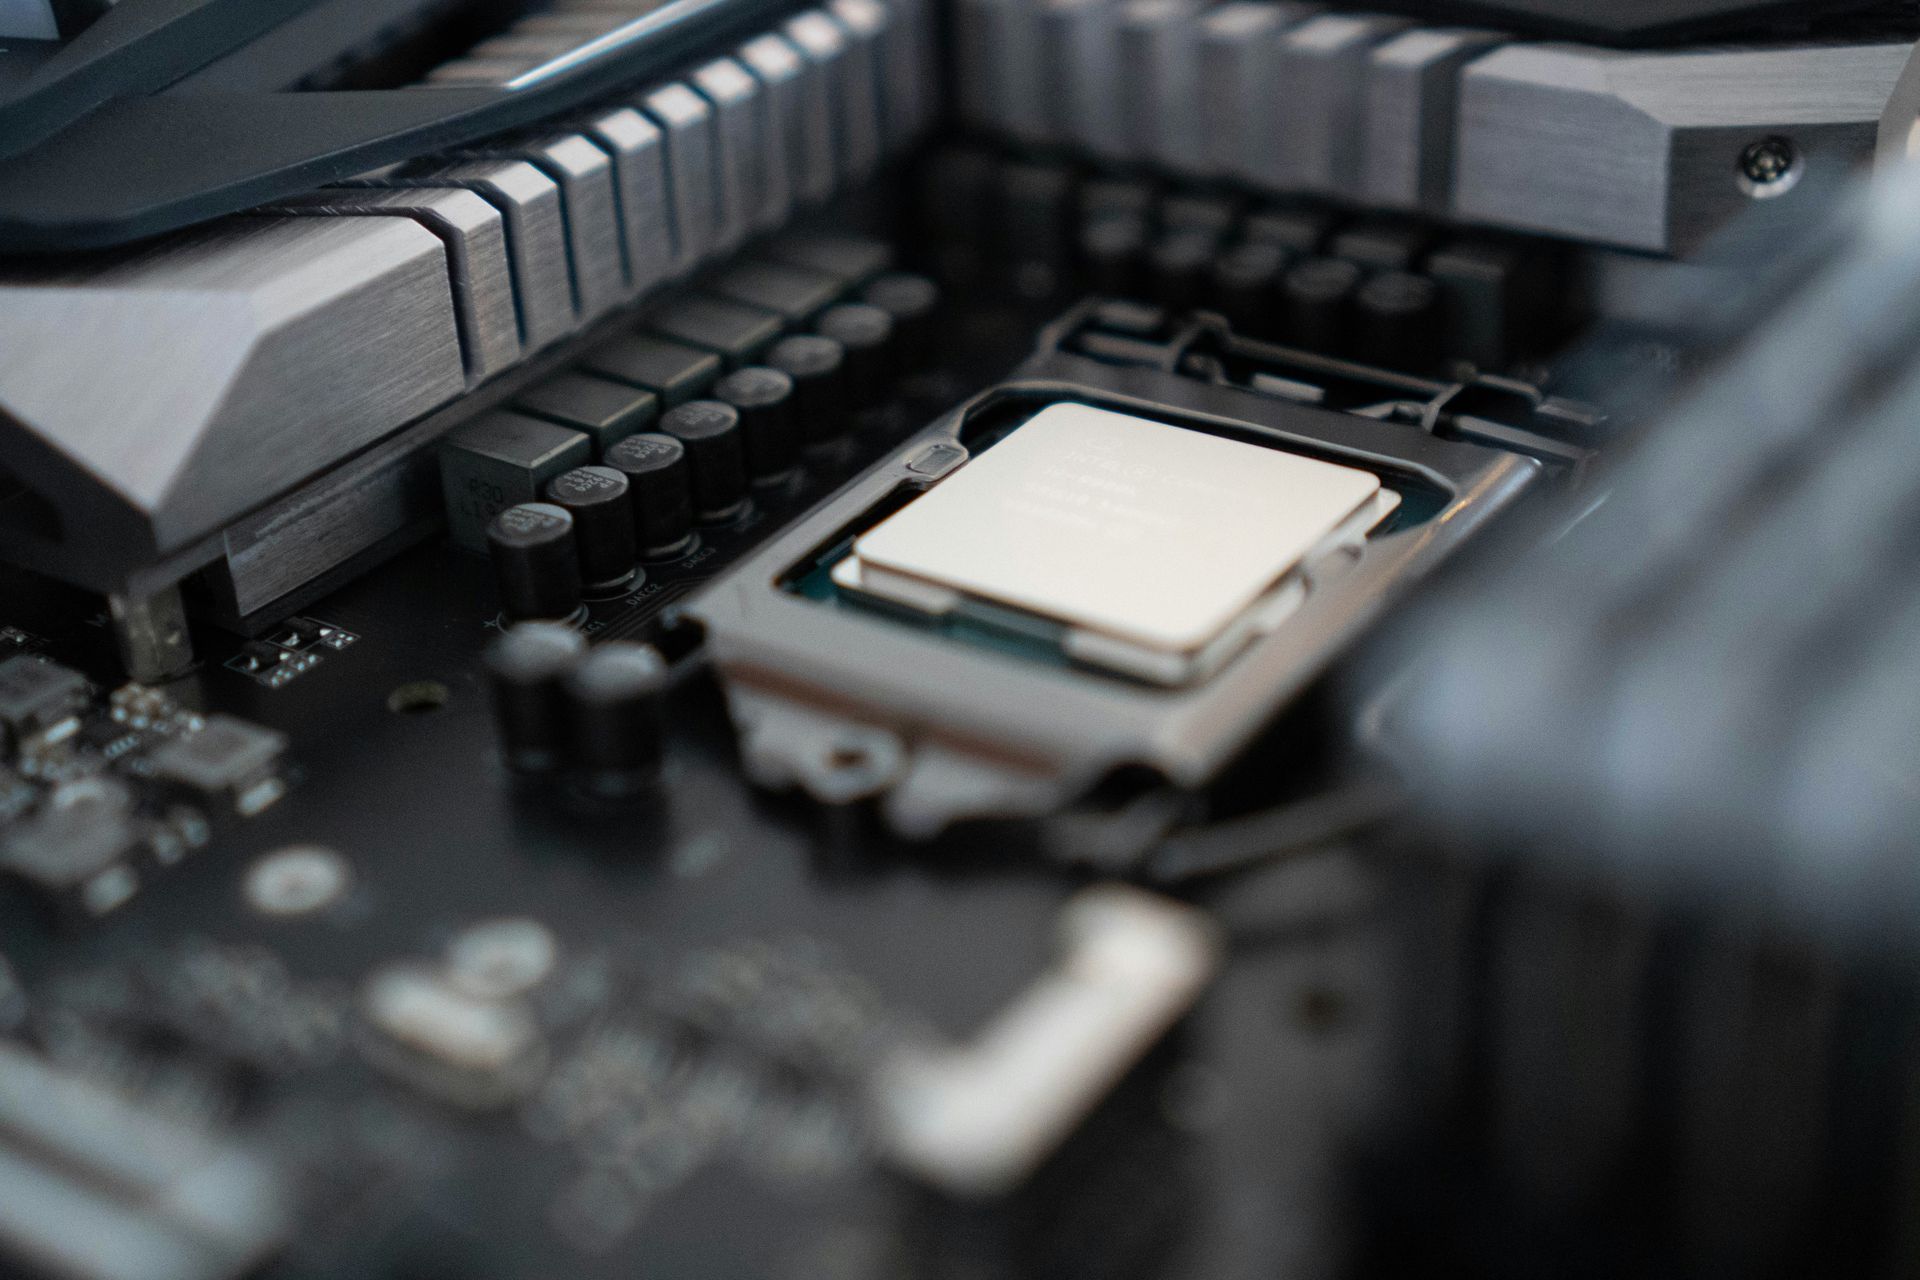 Intel and motherboard manufacturers clash over power limits